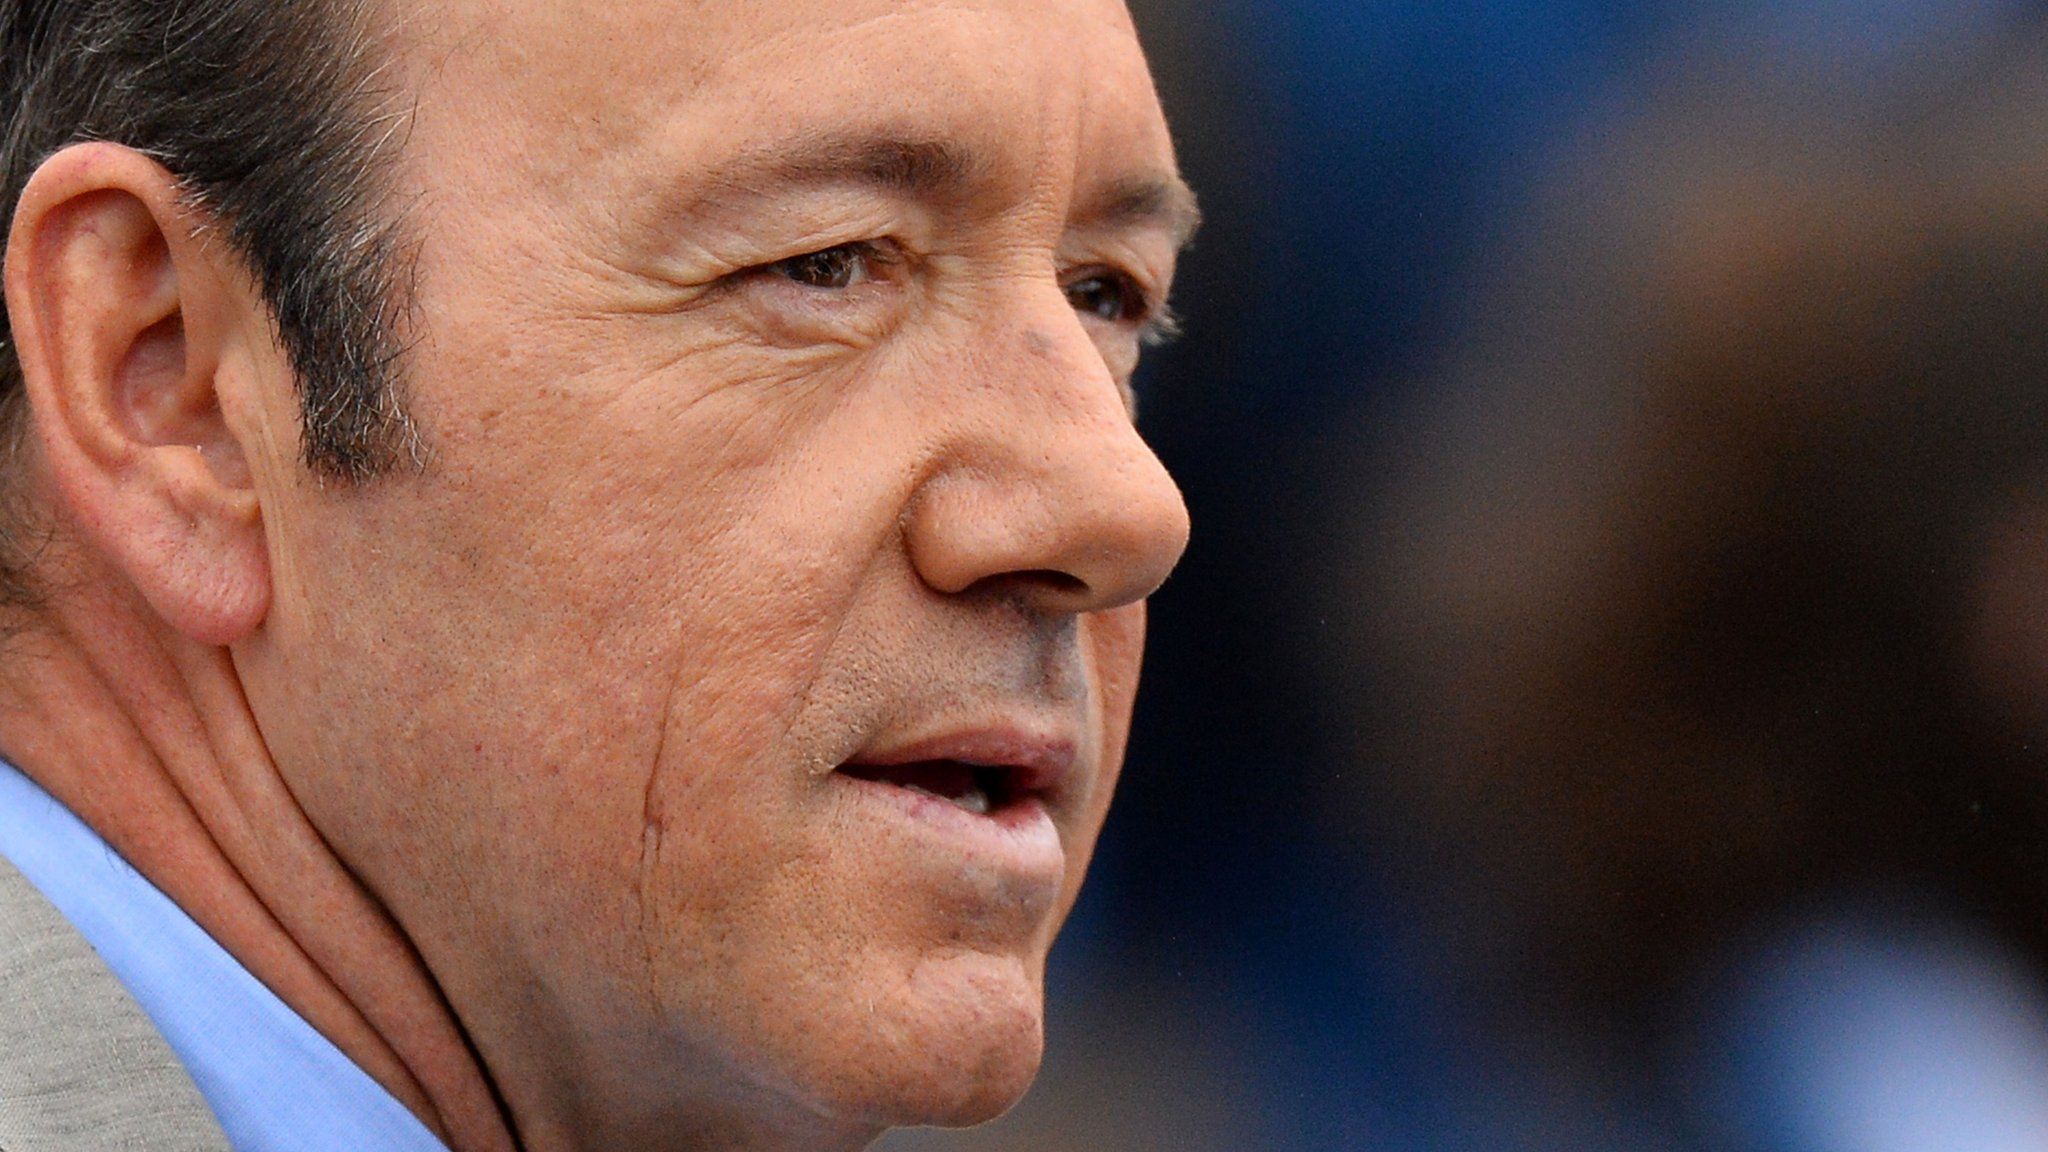 Image shows the actor Kevin Spacey